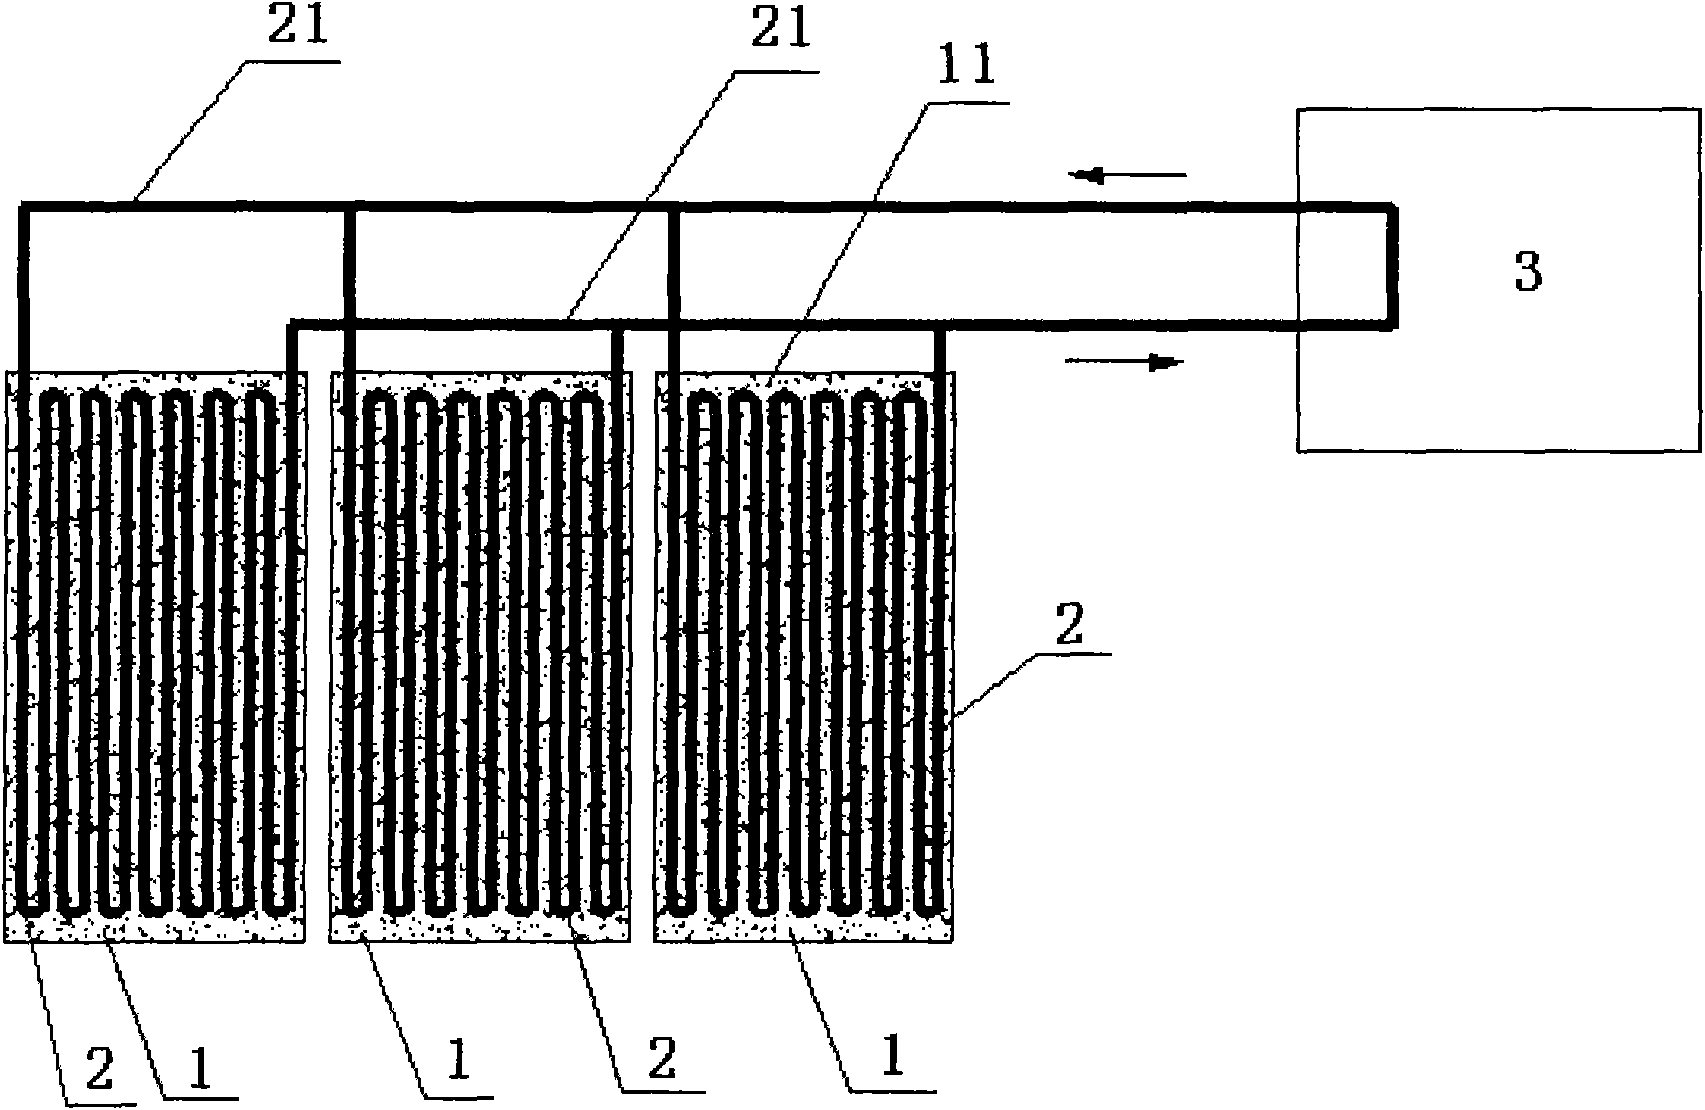 Ground source heat pump system with ground heat exchanger buried in diaphragm wall retaining structure